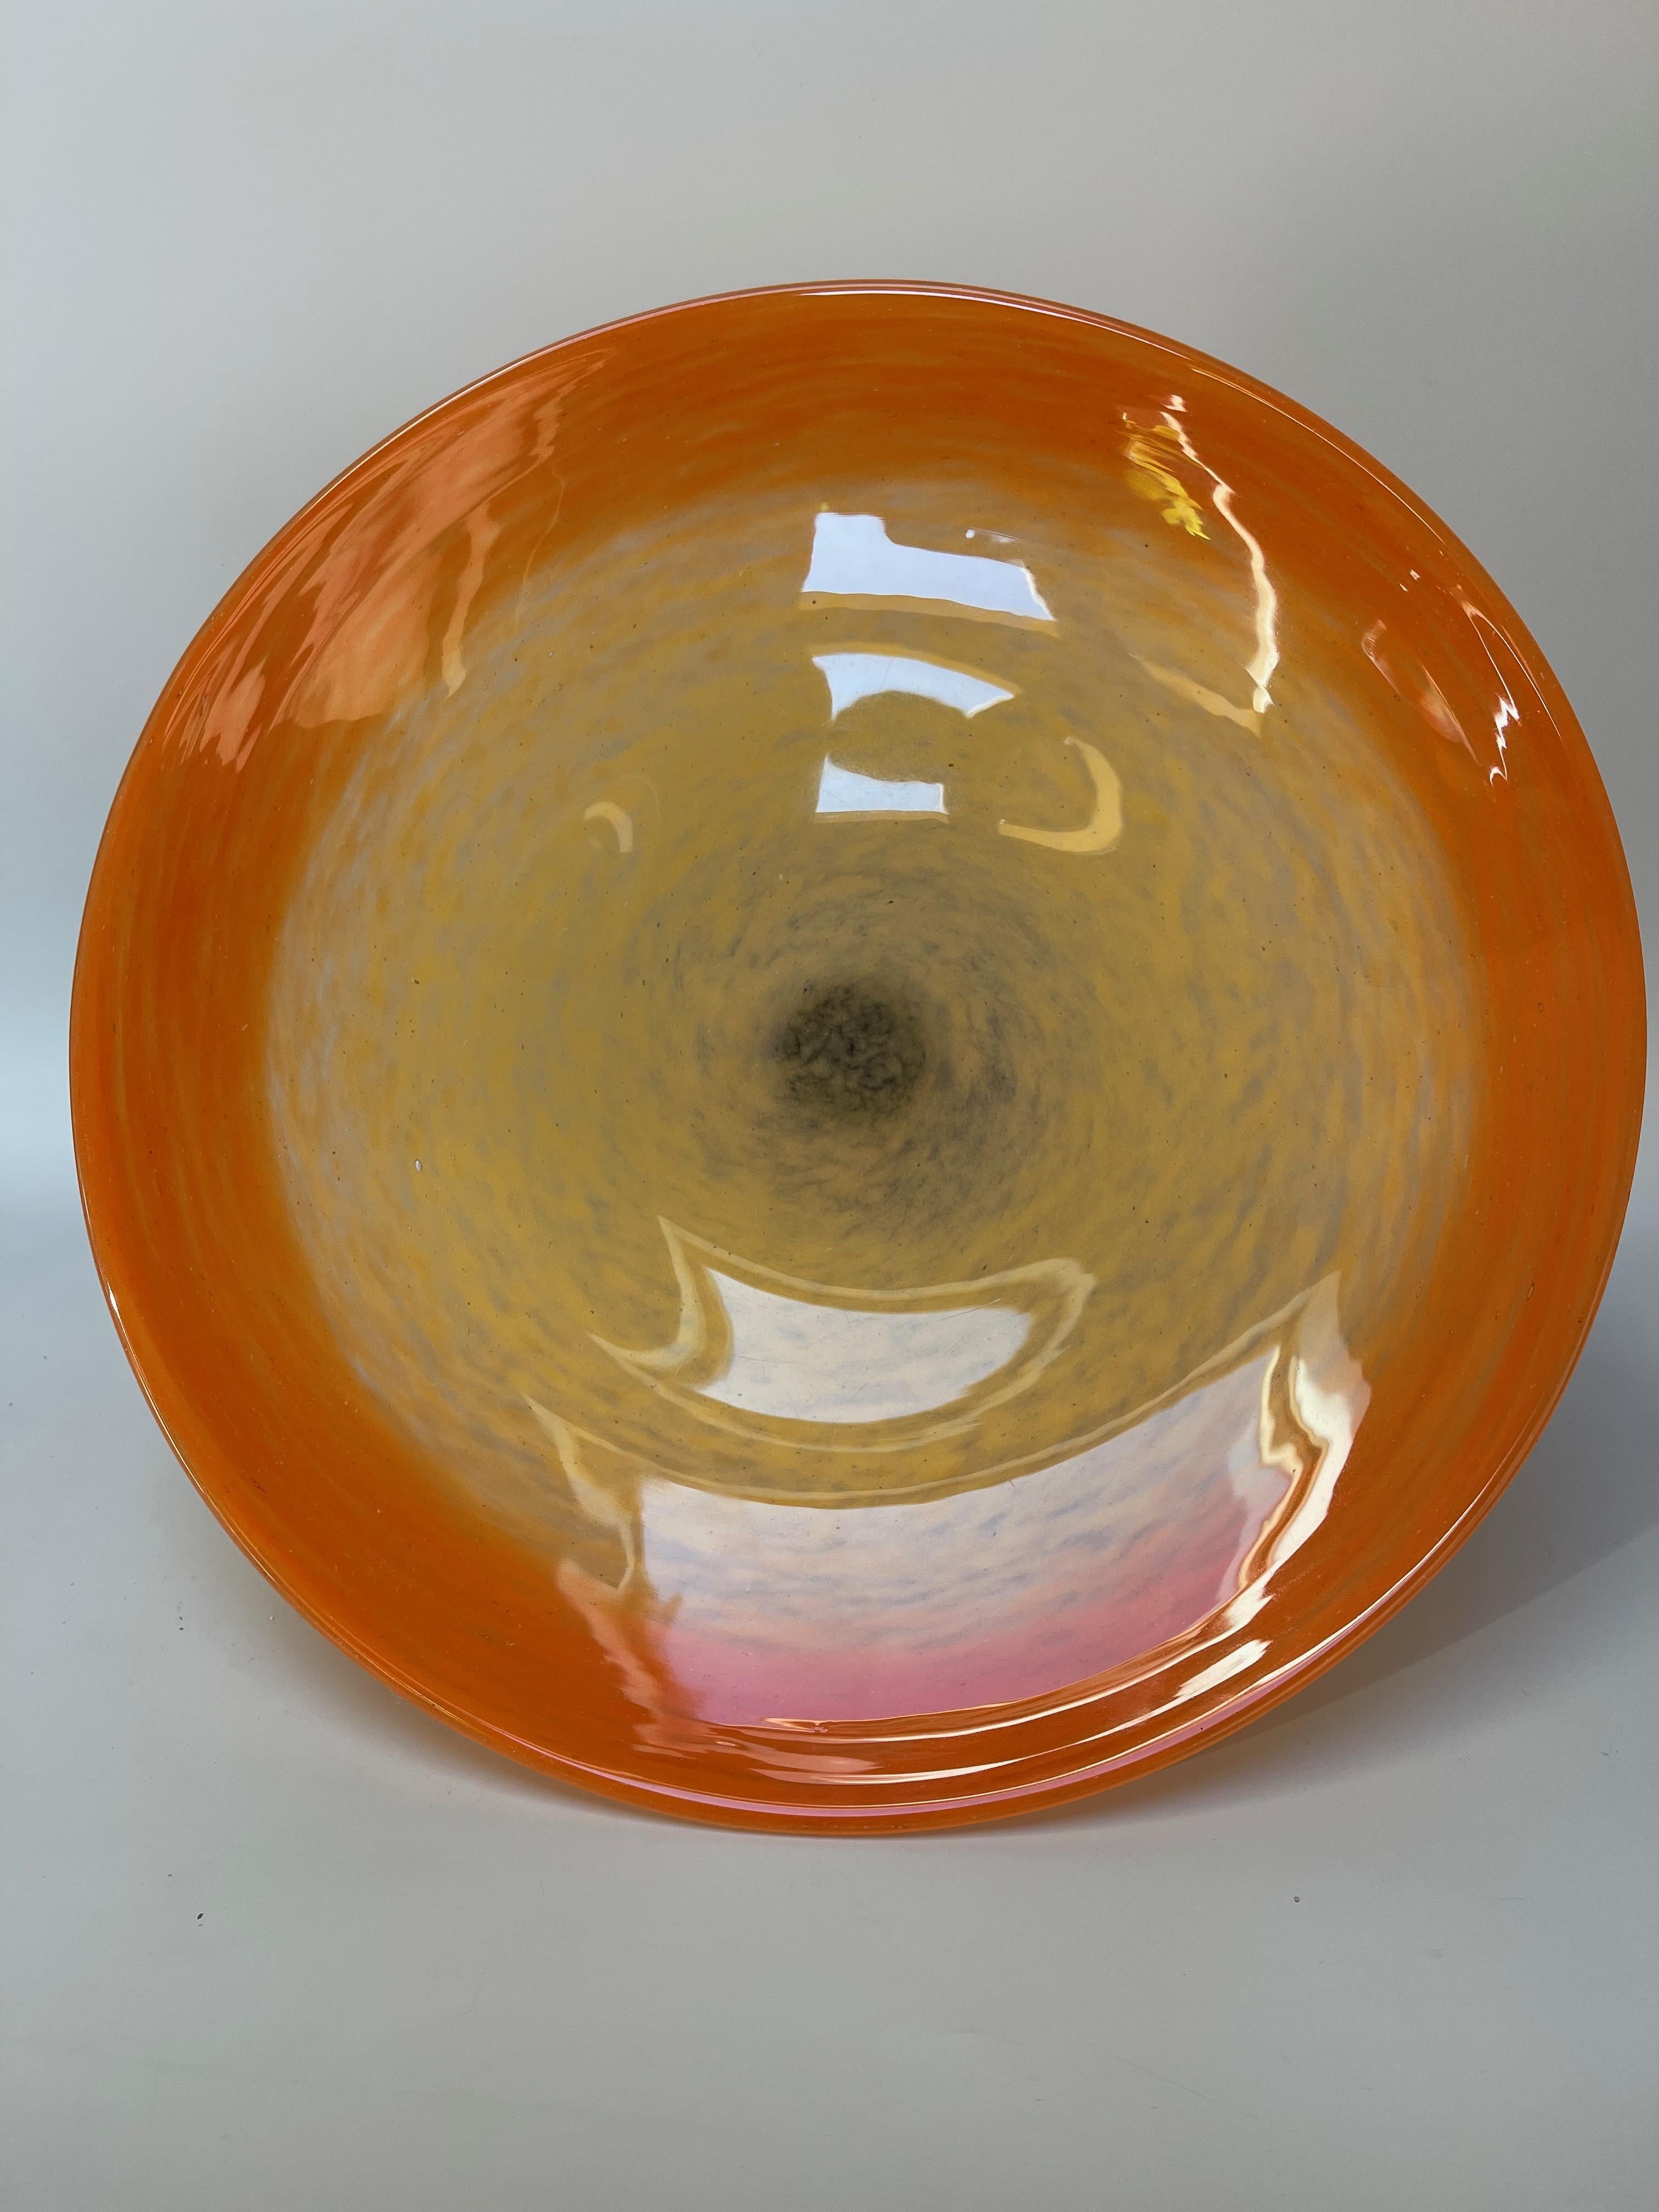 Schneider orange tango and yellow bowl on a wrought iron base with 3 coloured glass balls.
Signed 